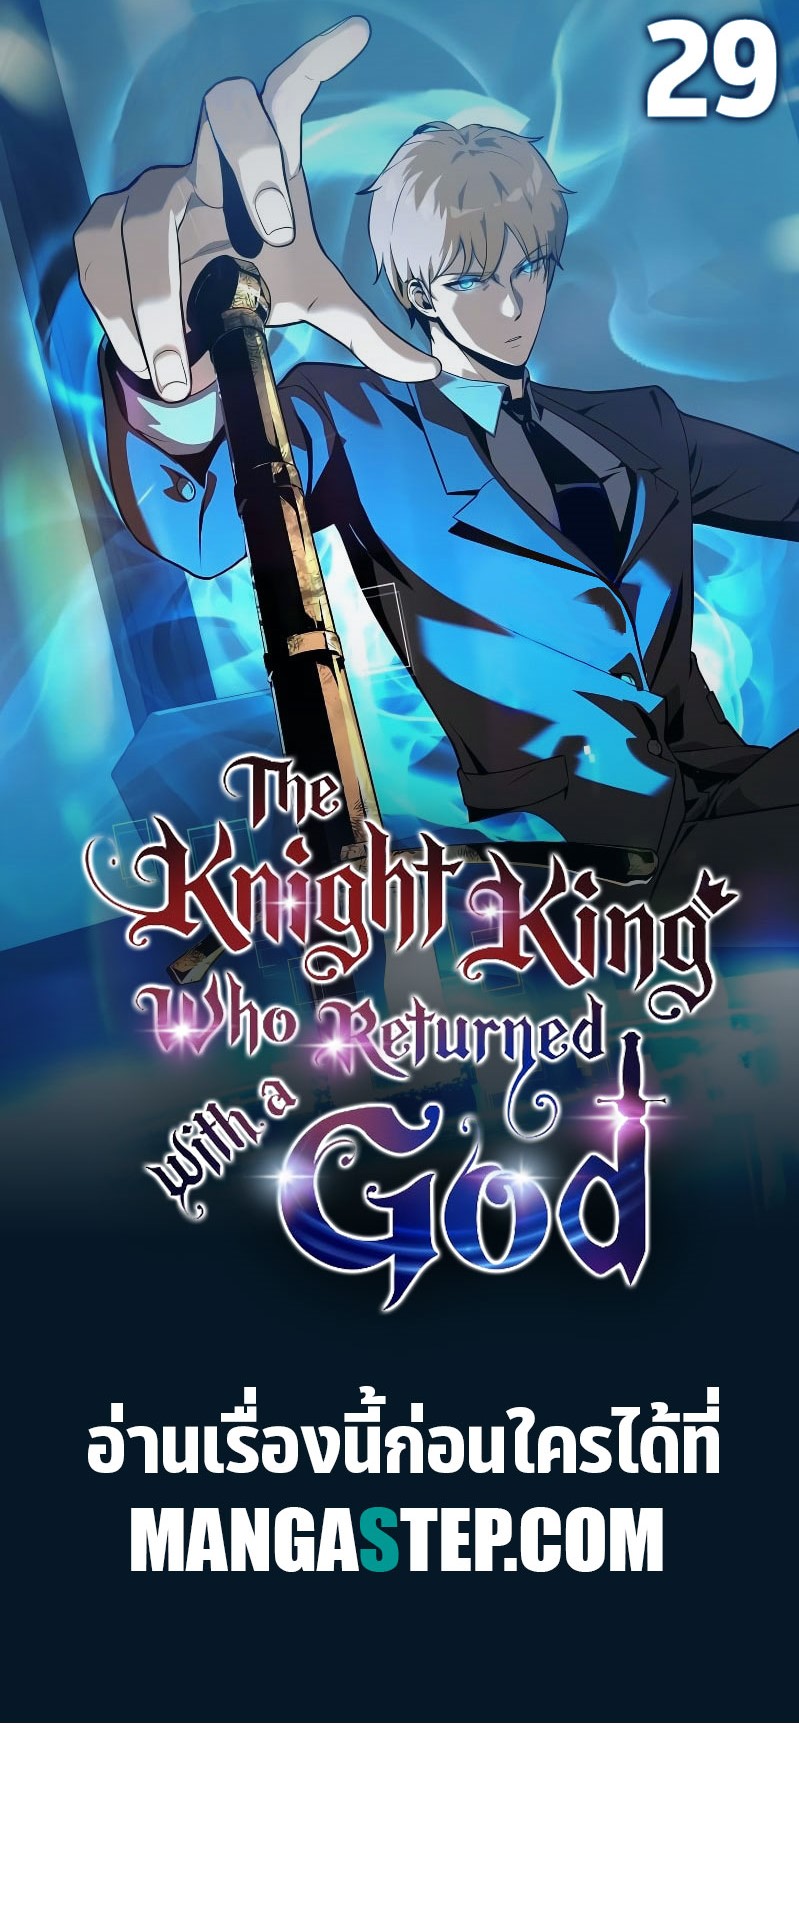 The Knight King 29 (1)